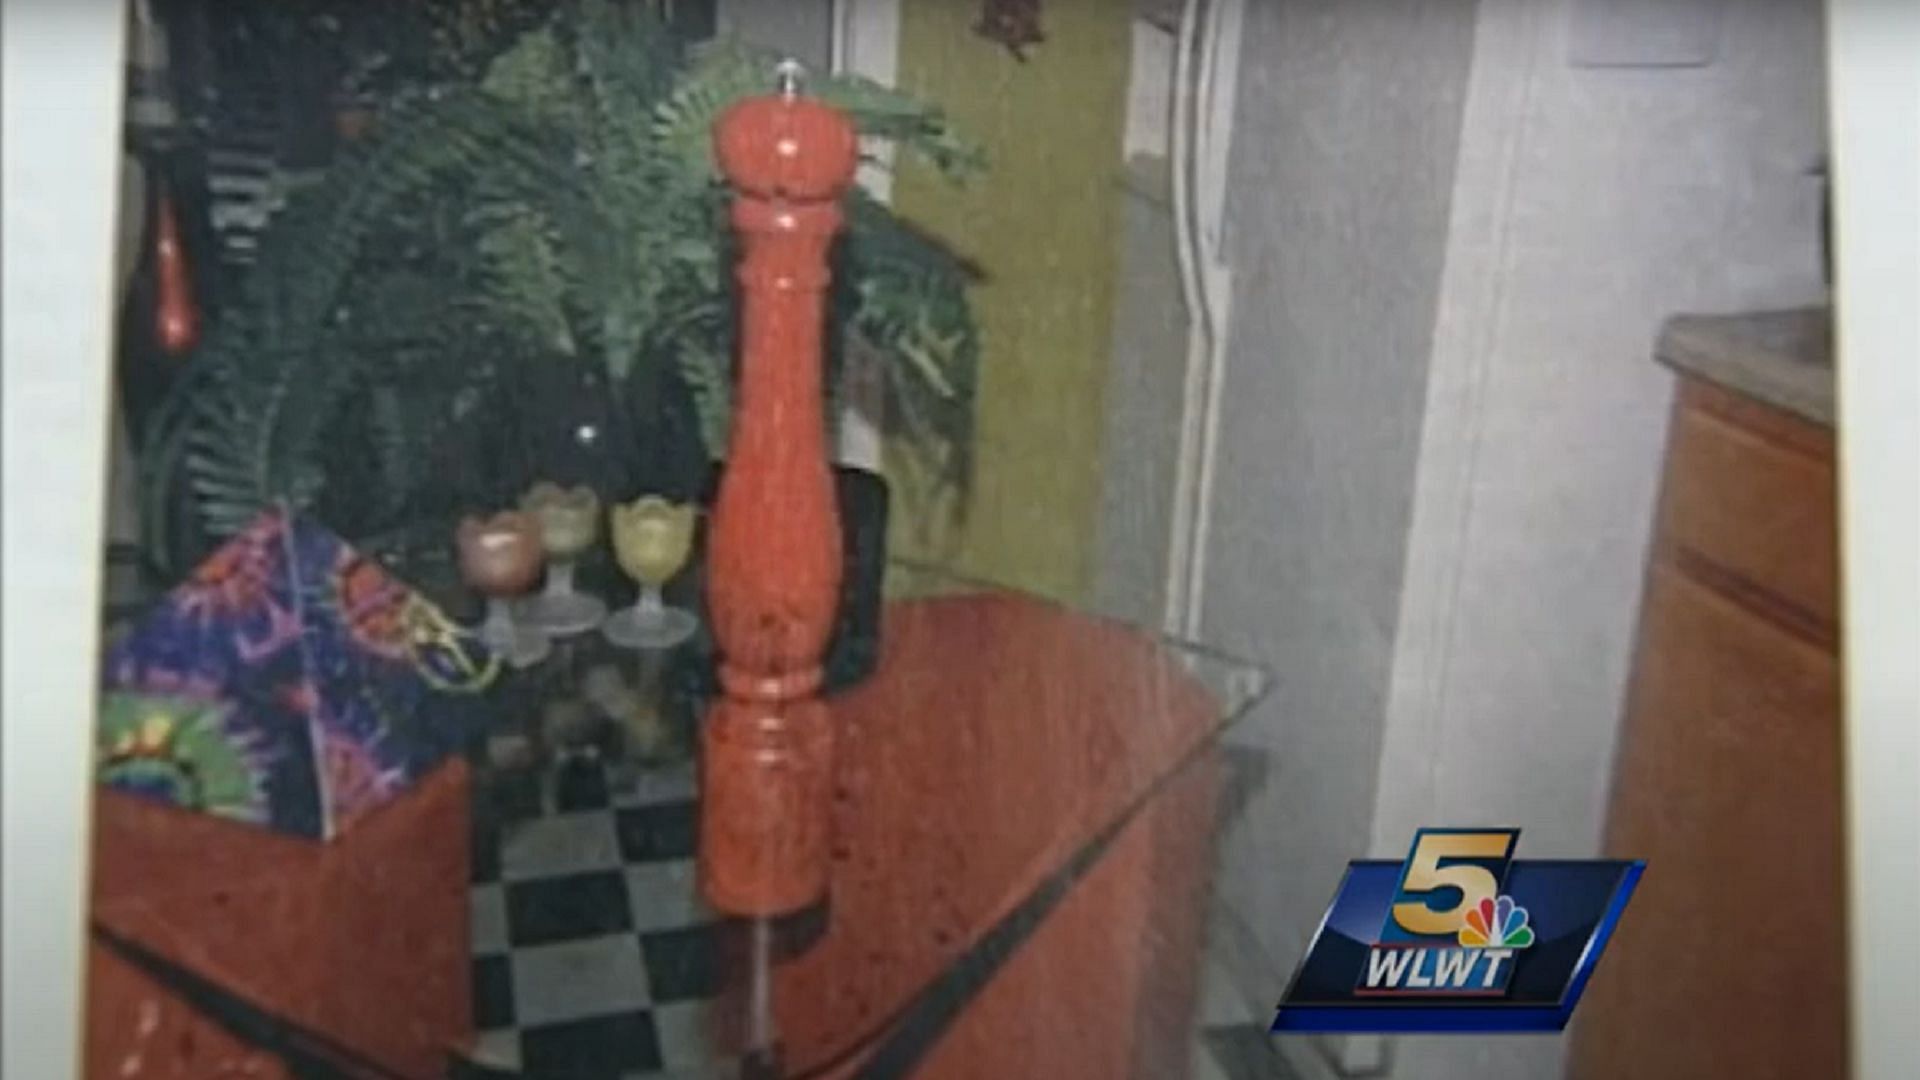 The pepper grinder used to murder Leigh Jennings (Image via WLWT/ Youtube)